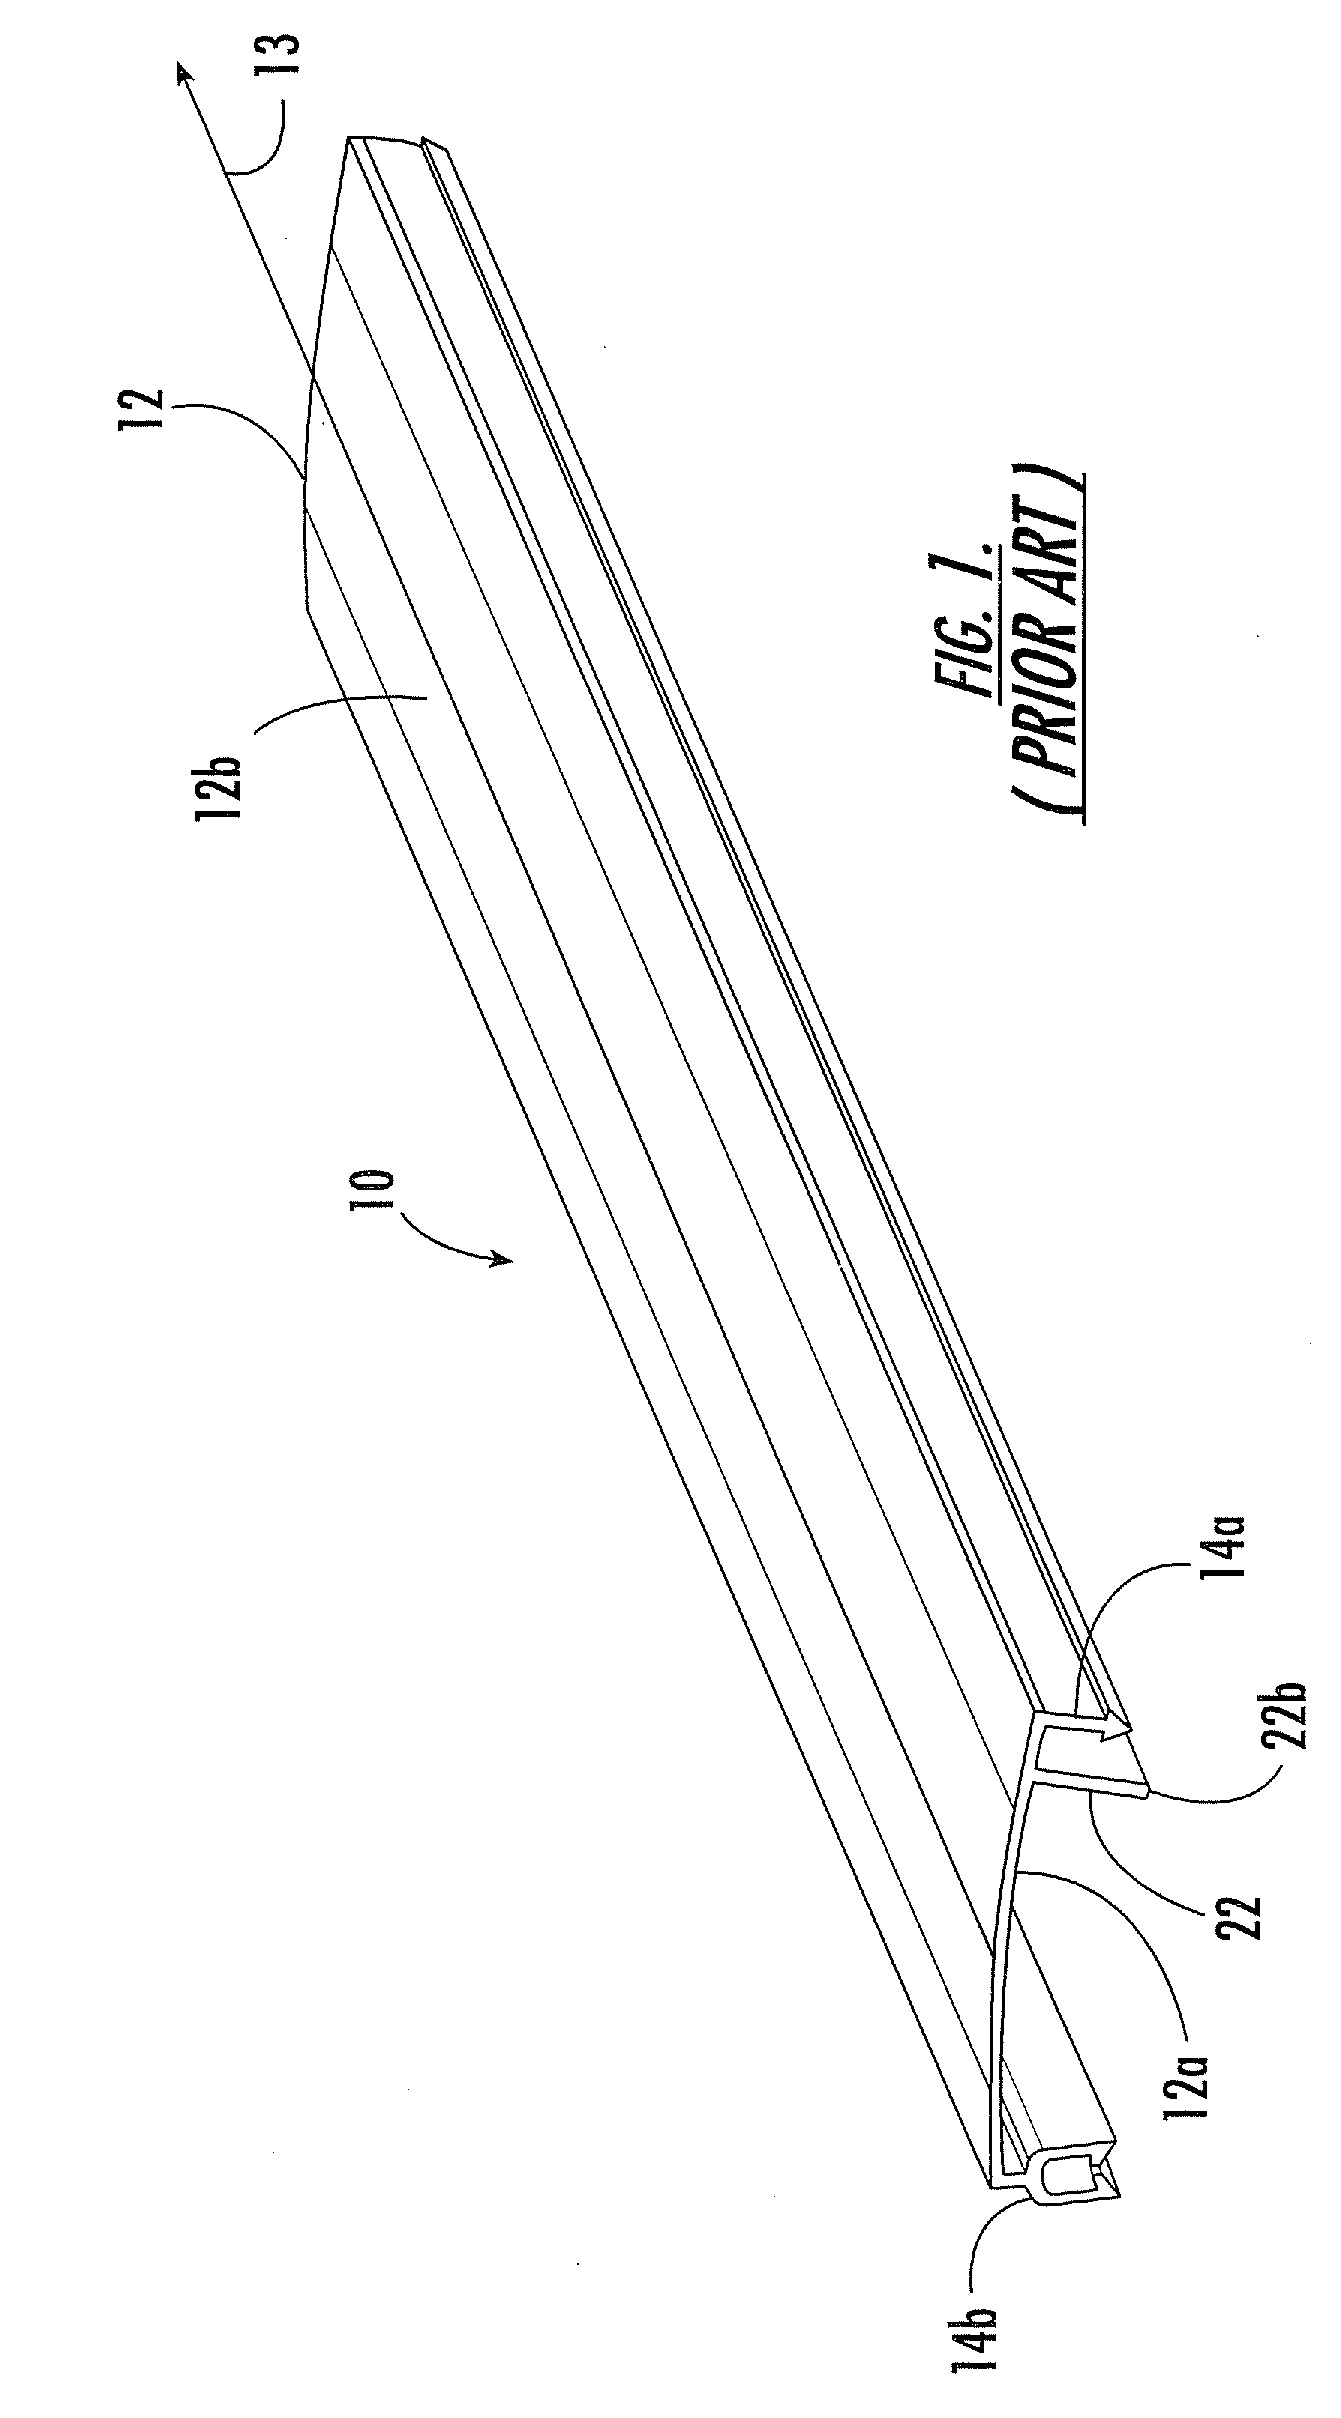 Hand-held apparatus for installing flashover protection covers on energized electrical conductors